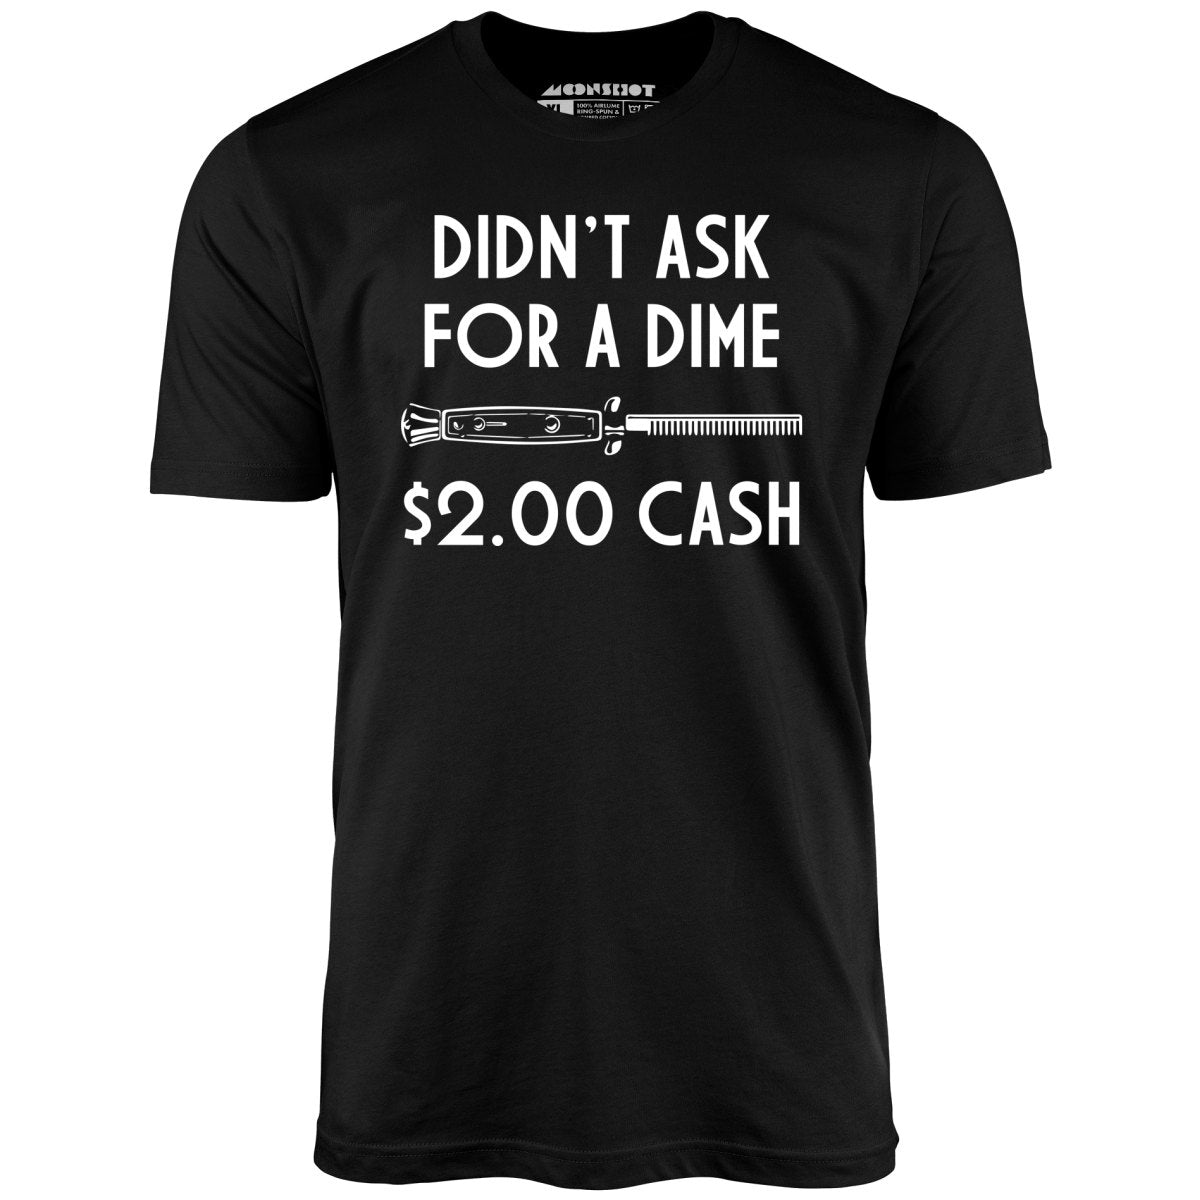 Didn't Ask For a Dime - Unisex T-Shirt